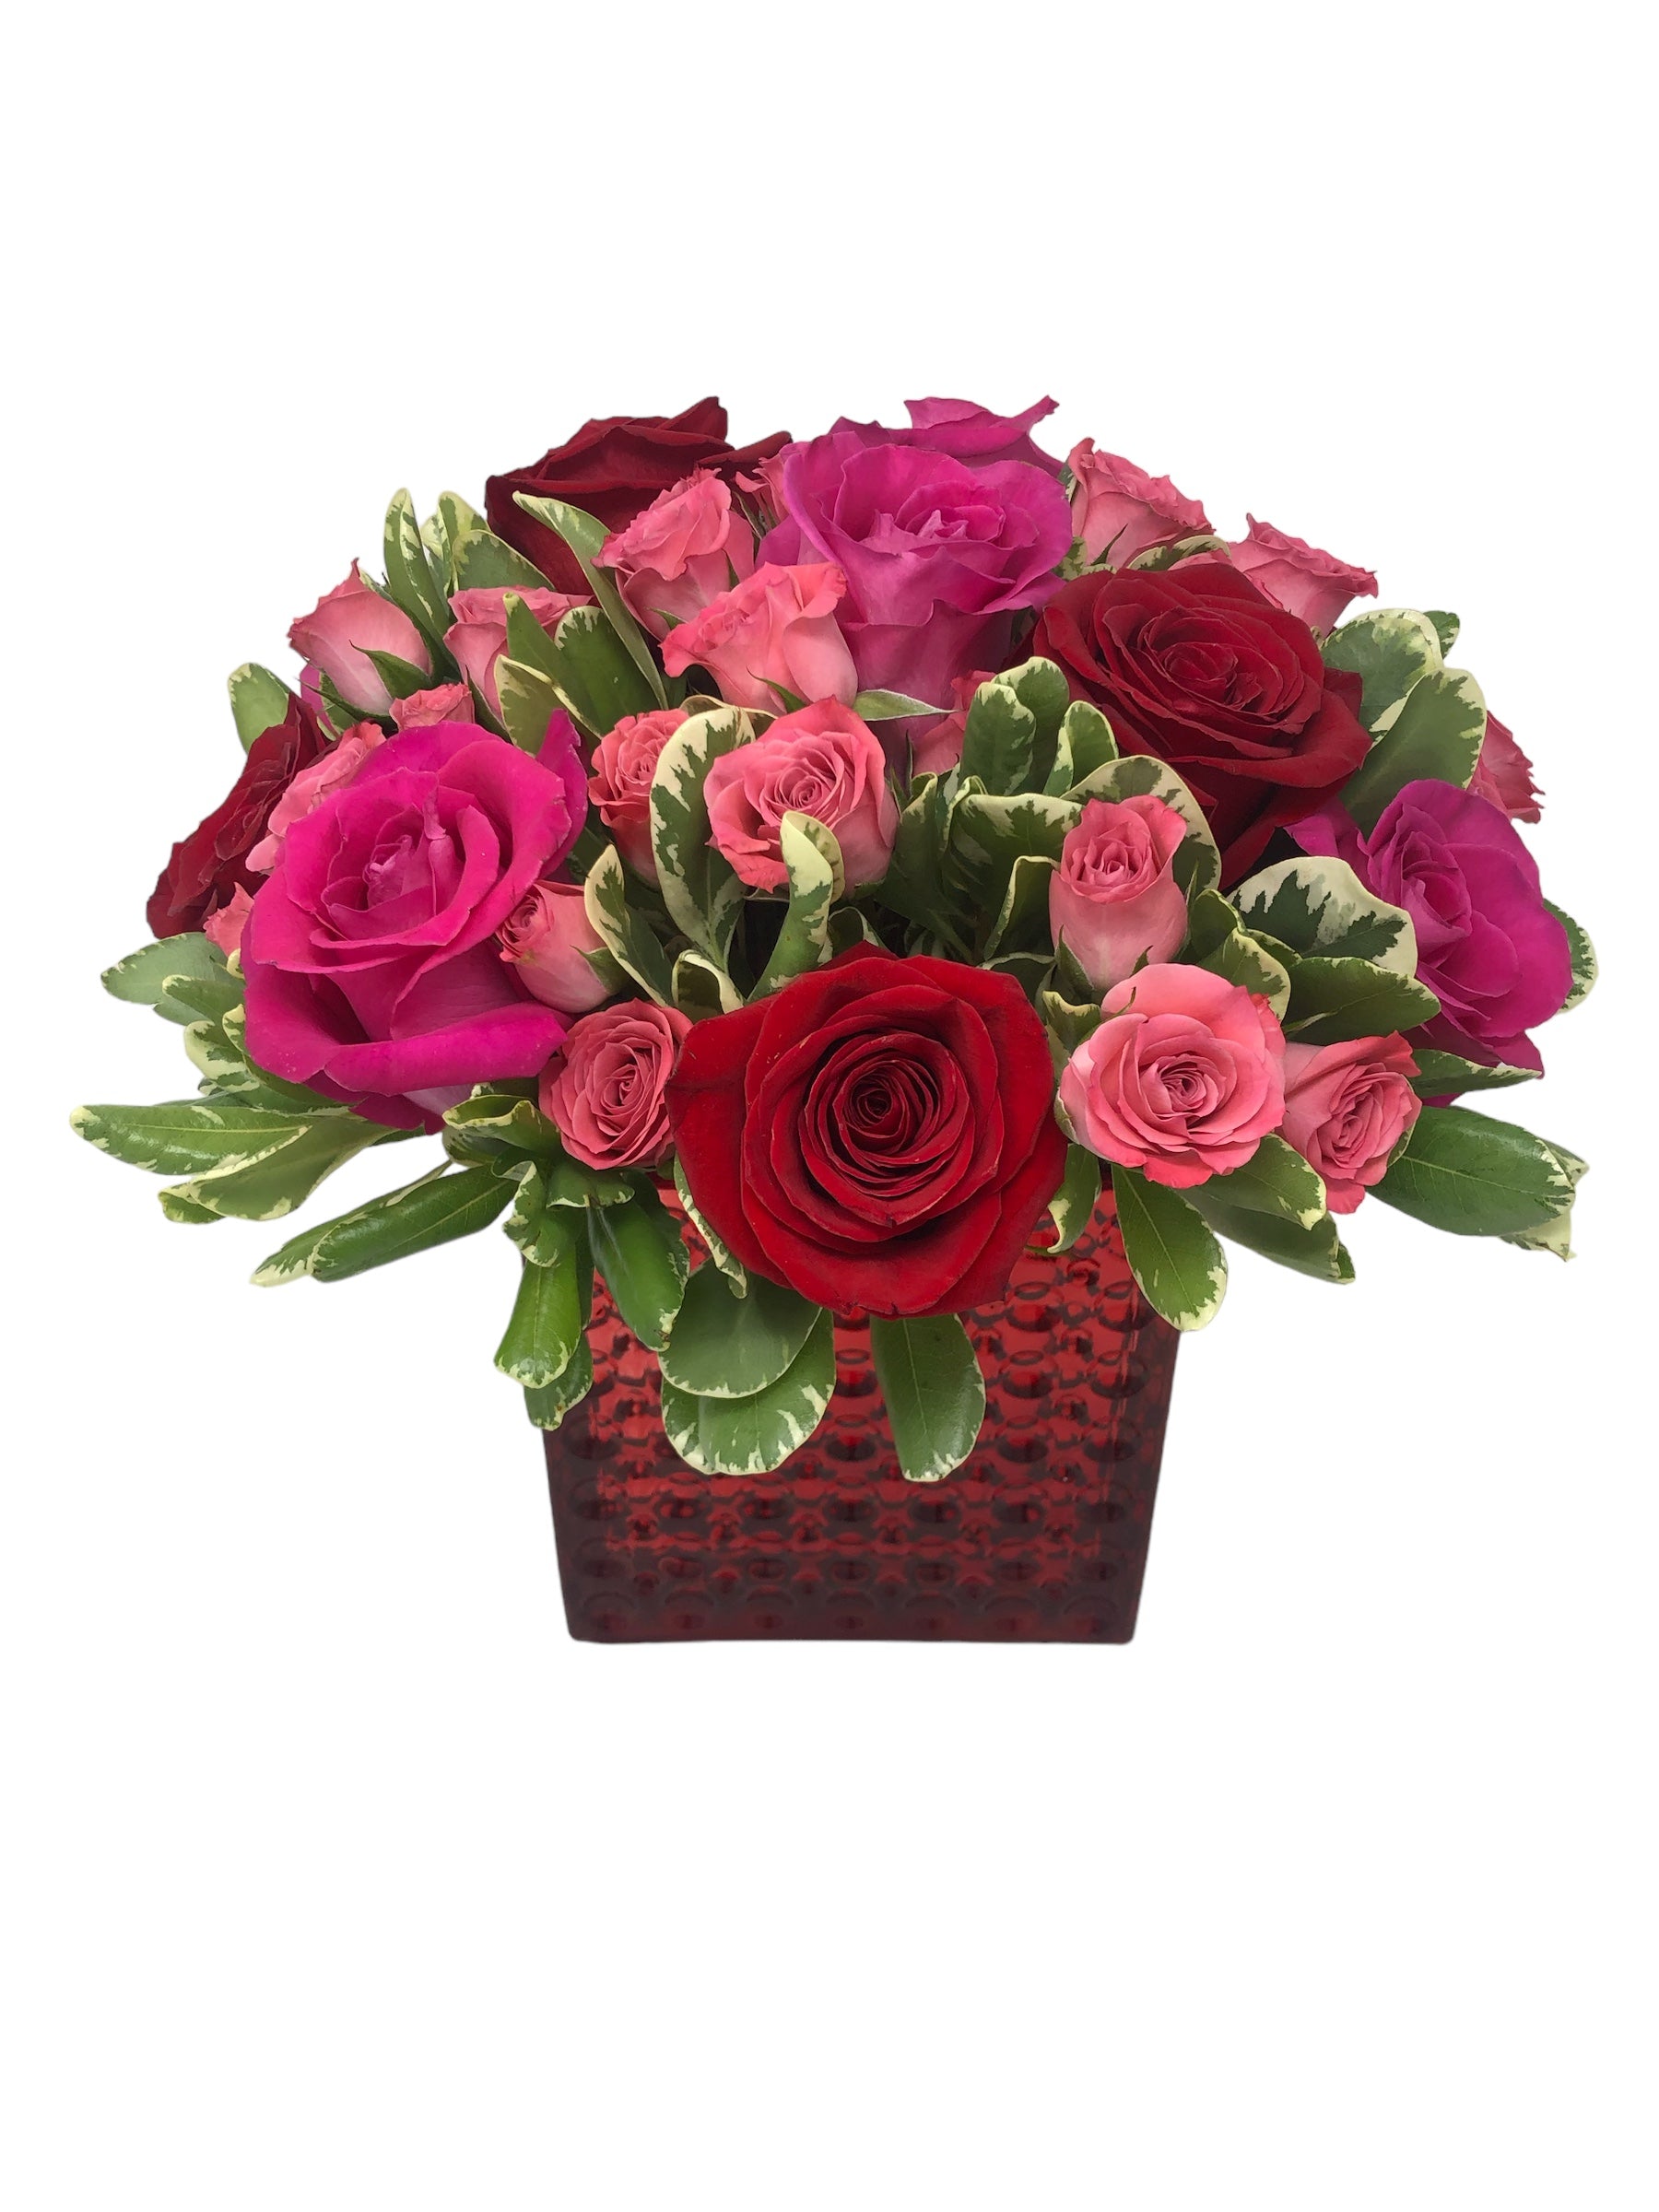 Rose Medley-Anniversary love bouquet with assorted roses expressing deep affection and romance